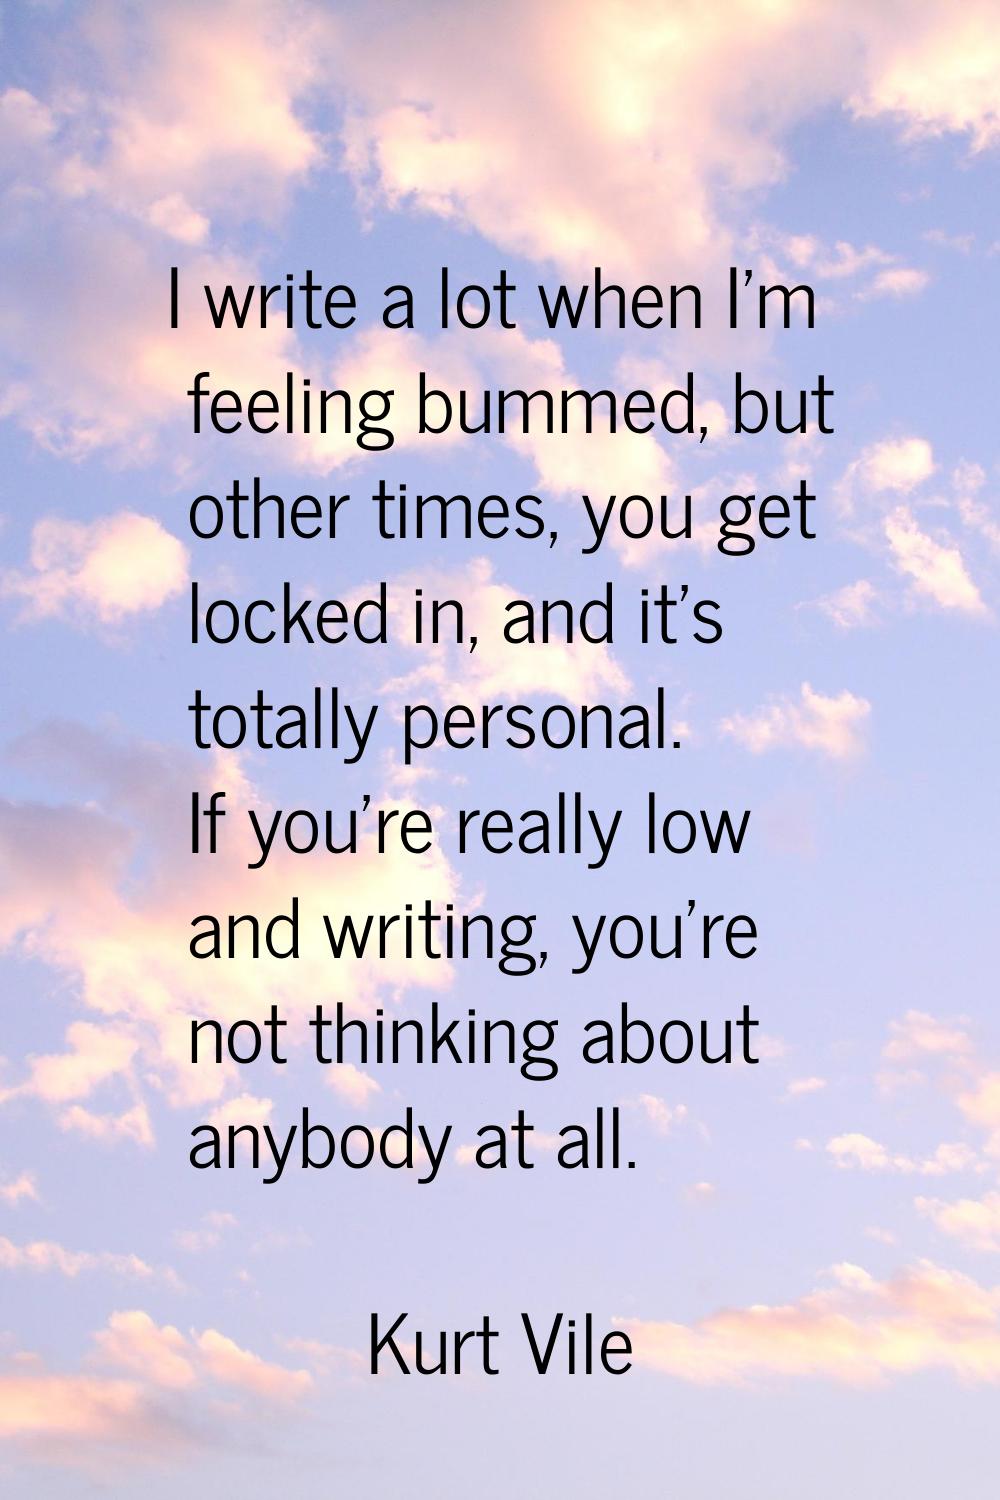 I write a lot when I'm feeling bummed, but other times, you get locked in, and it's totally persona